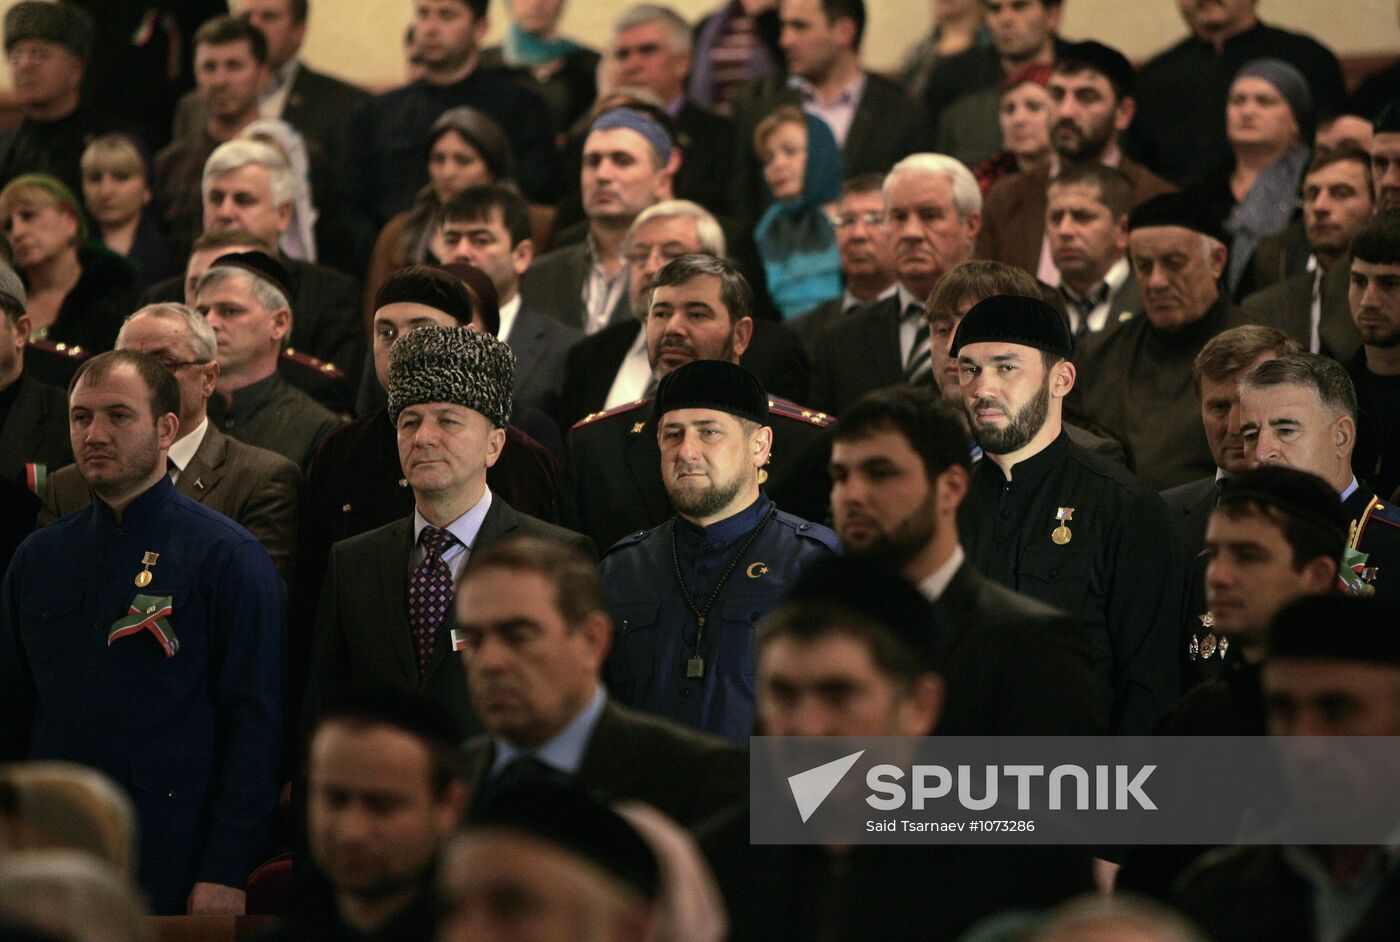 Chechen Constitution Day celebrated in Grozny